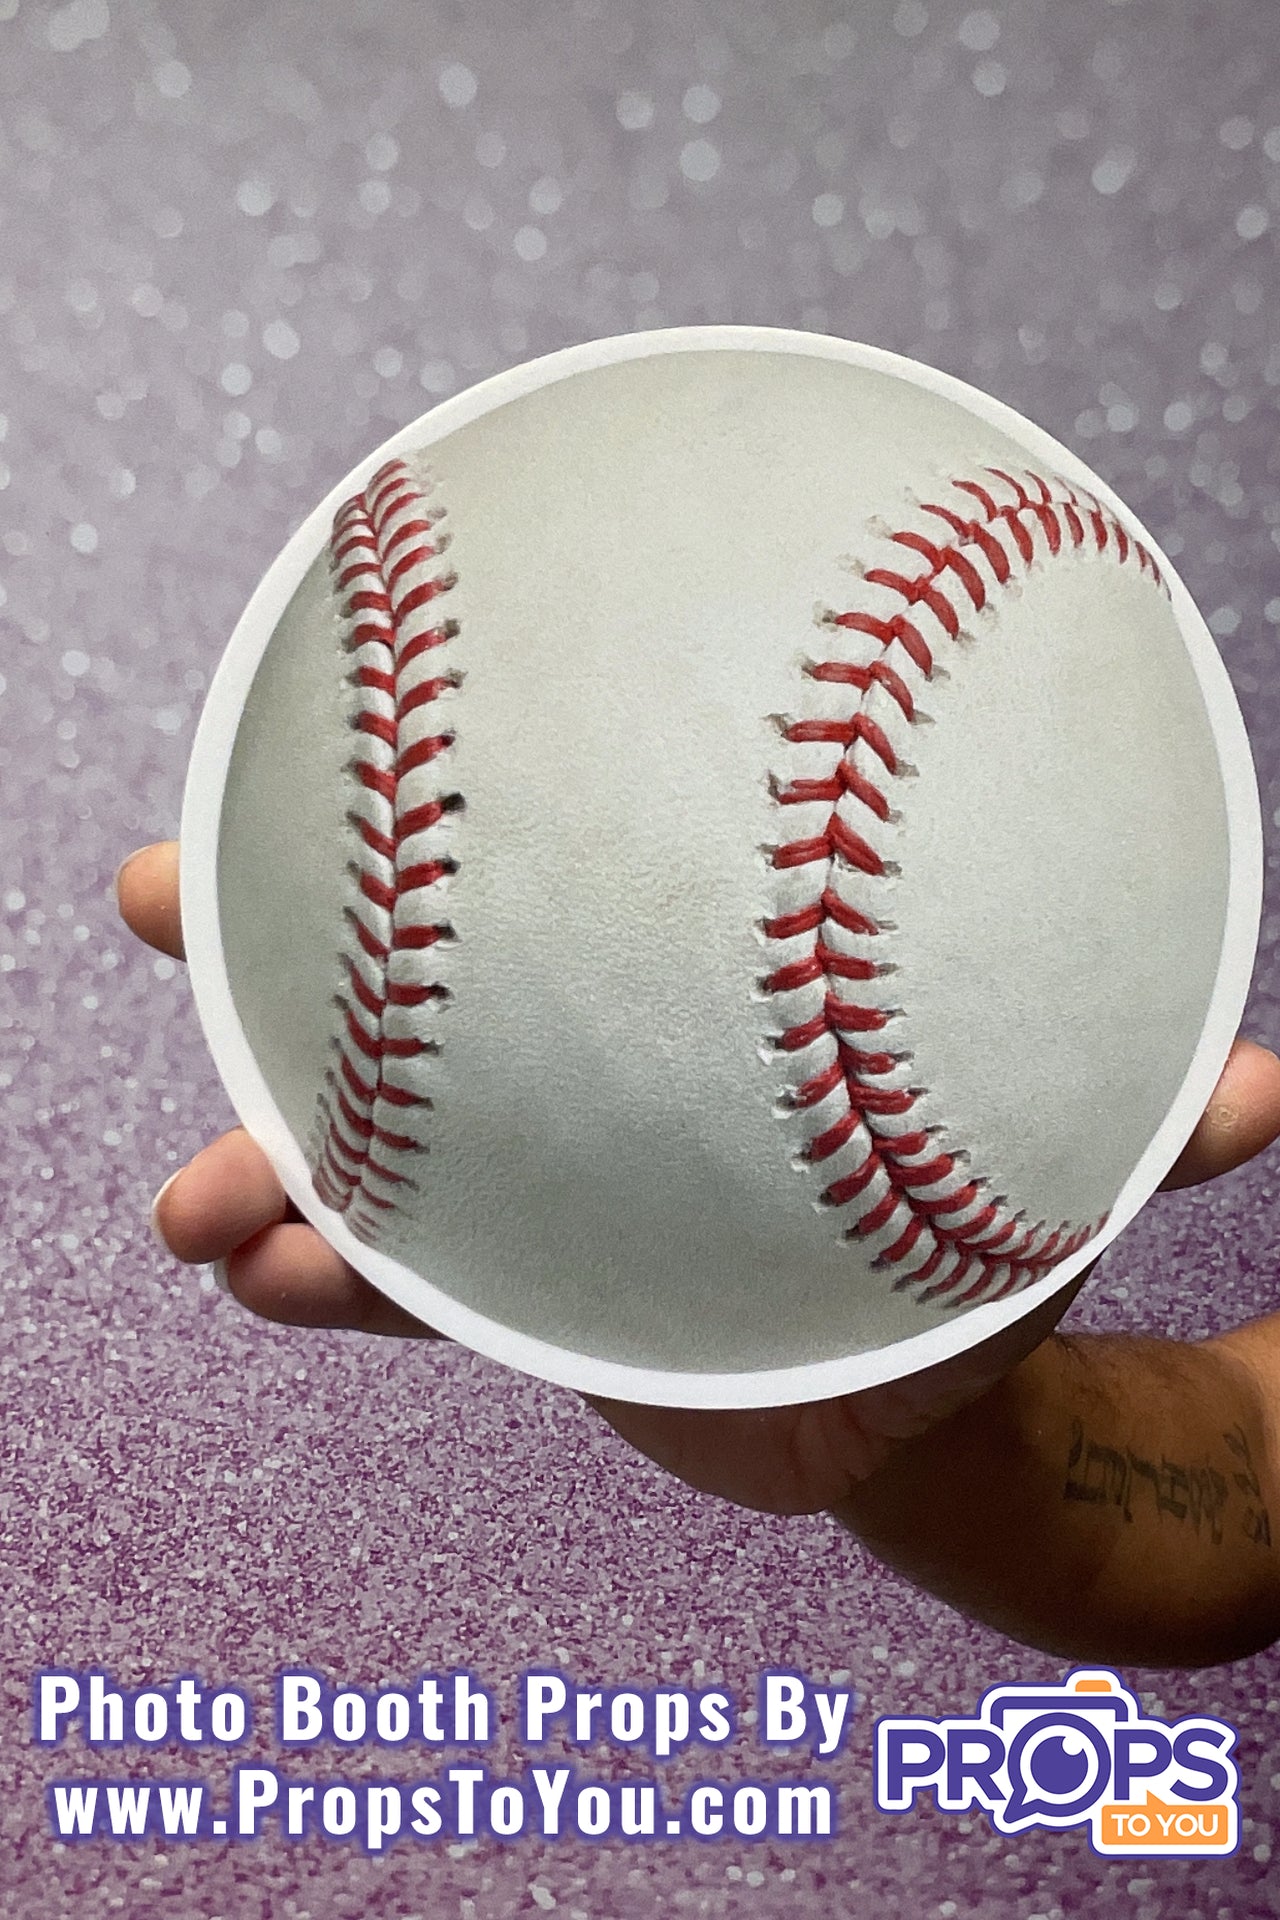 BUNDLE: Baseball 5 Double-Sided Photo Booth Props